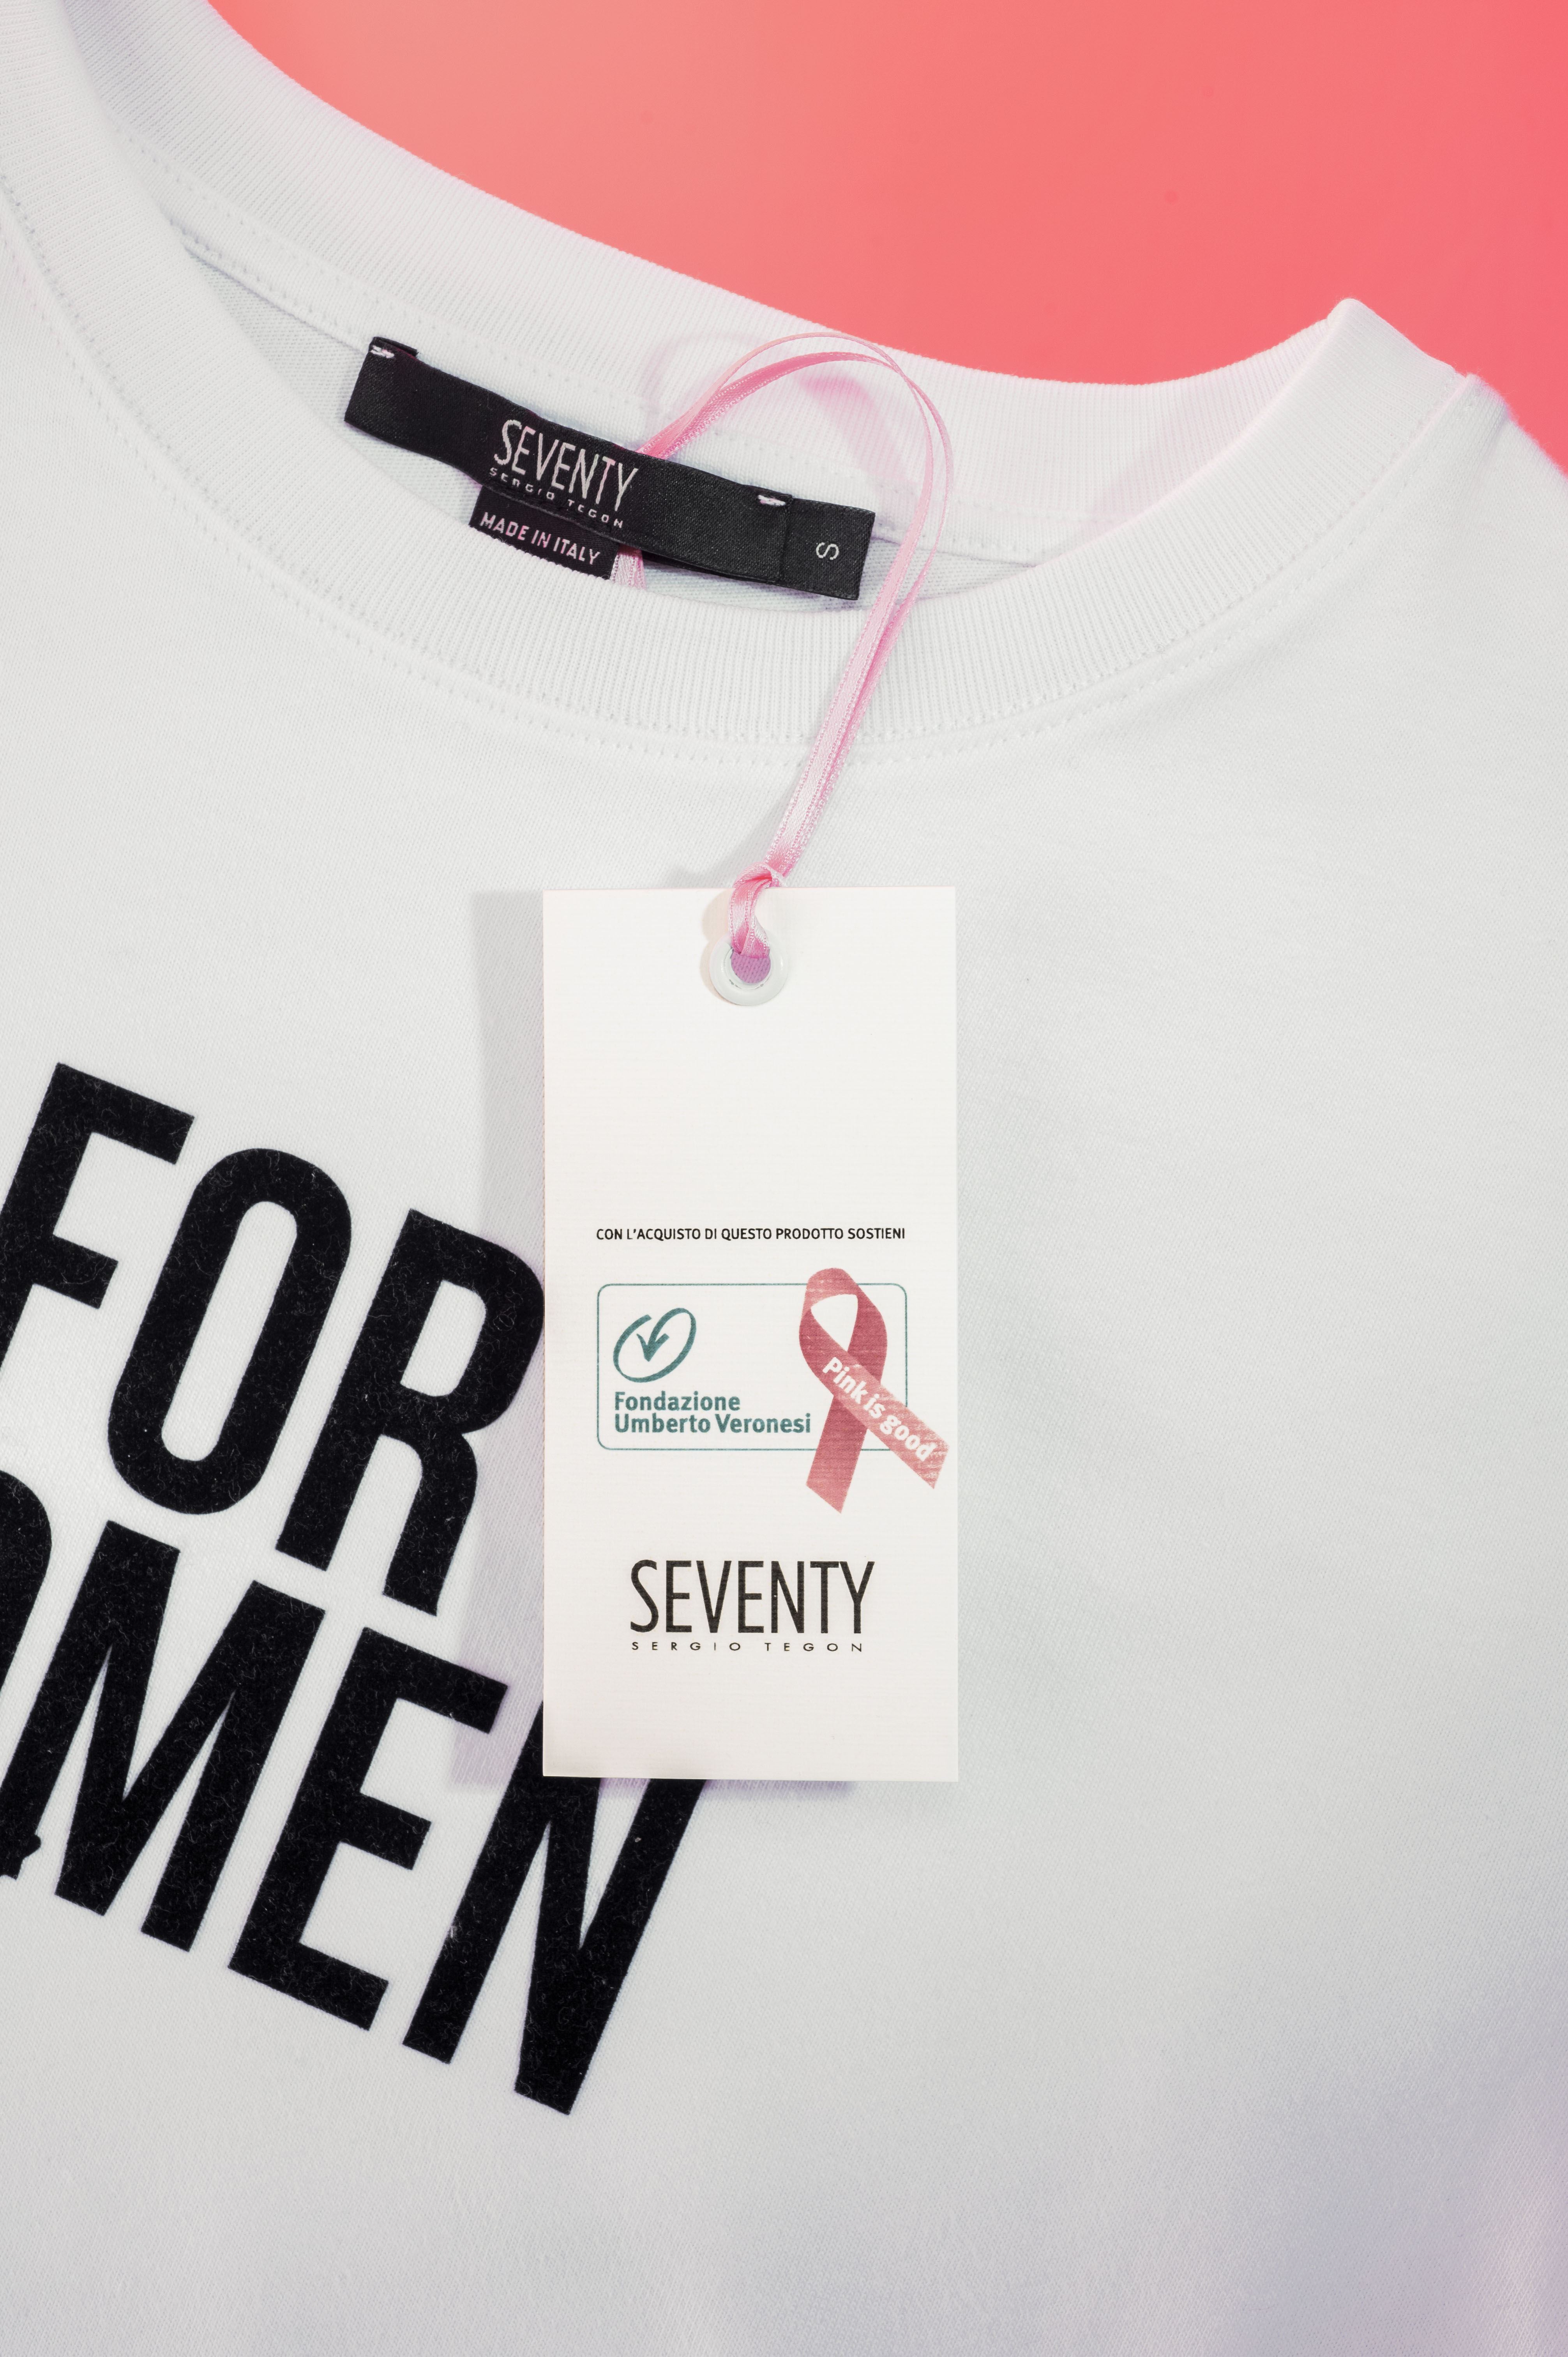 Seventy supports Pink Is Good with the charity project For Women By Women